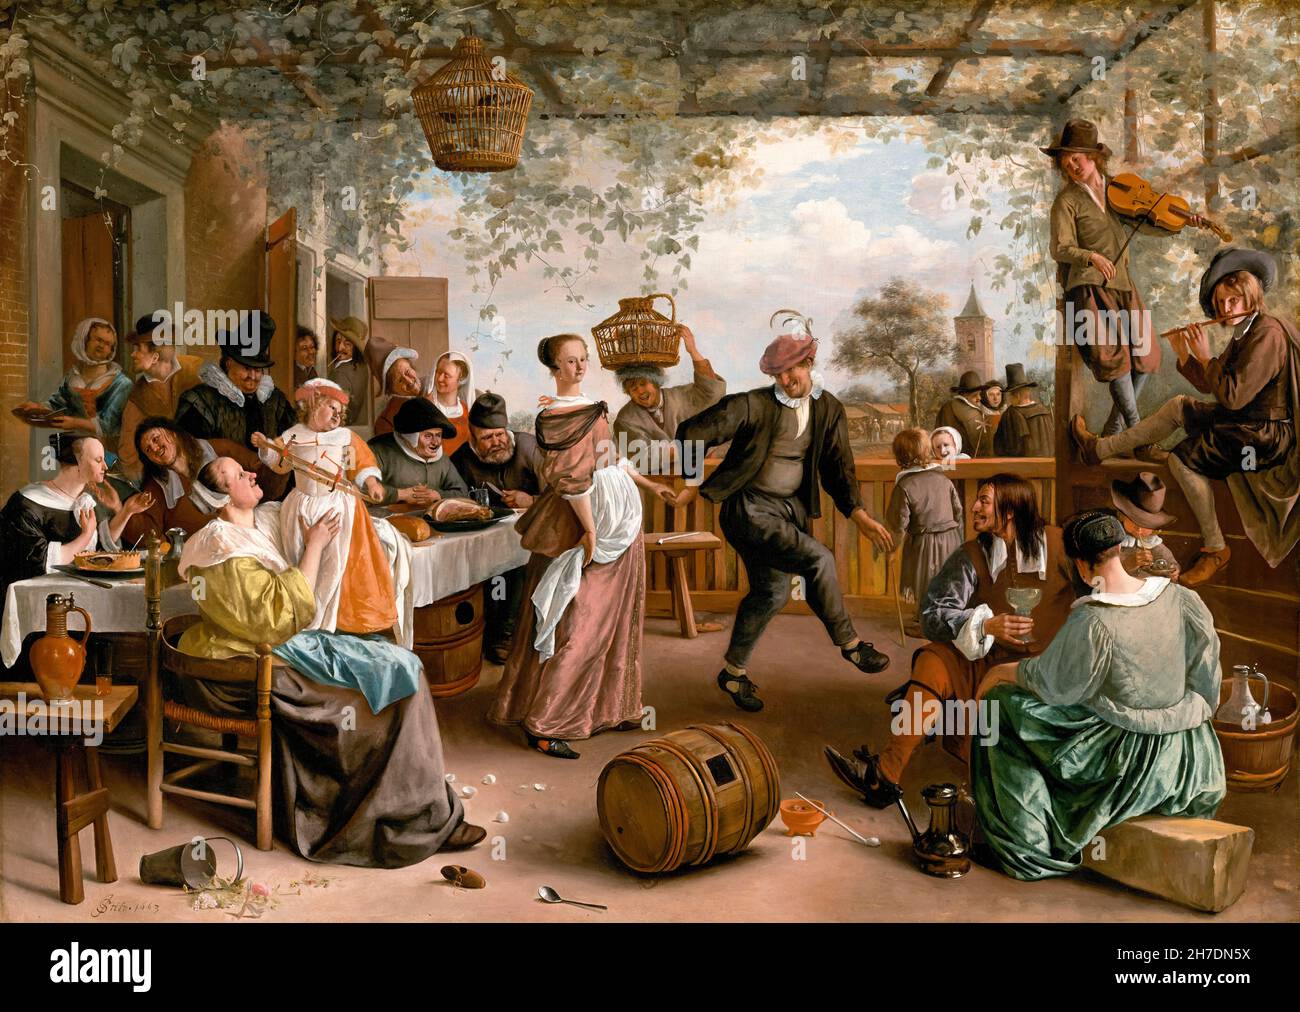 Jan Steen, painting, The Dancing Couple, 1663 Stock Photo